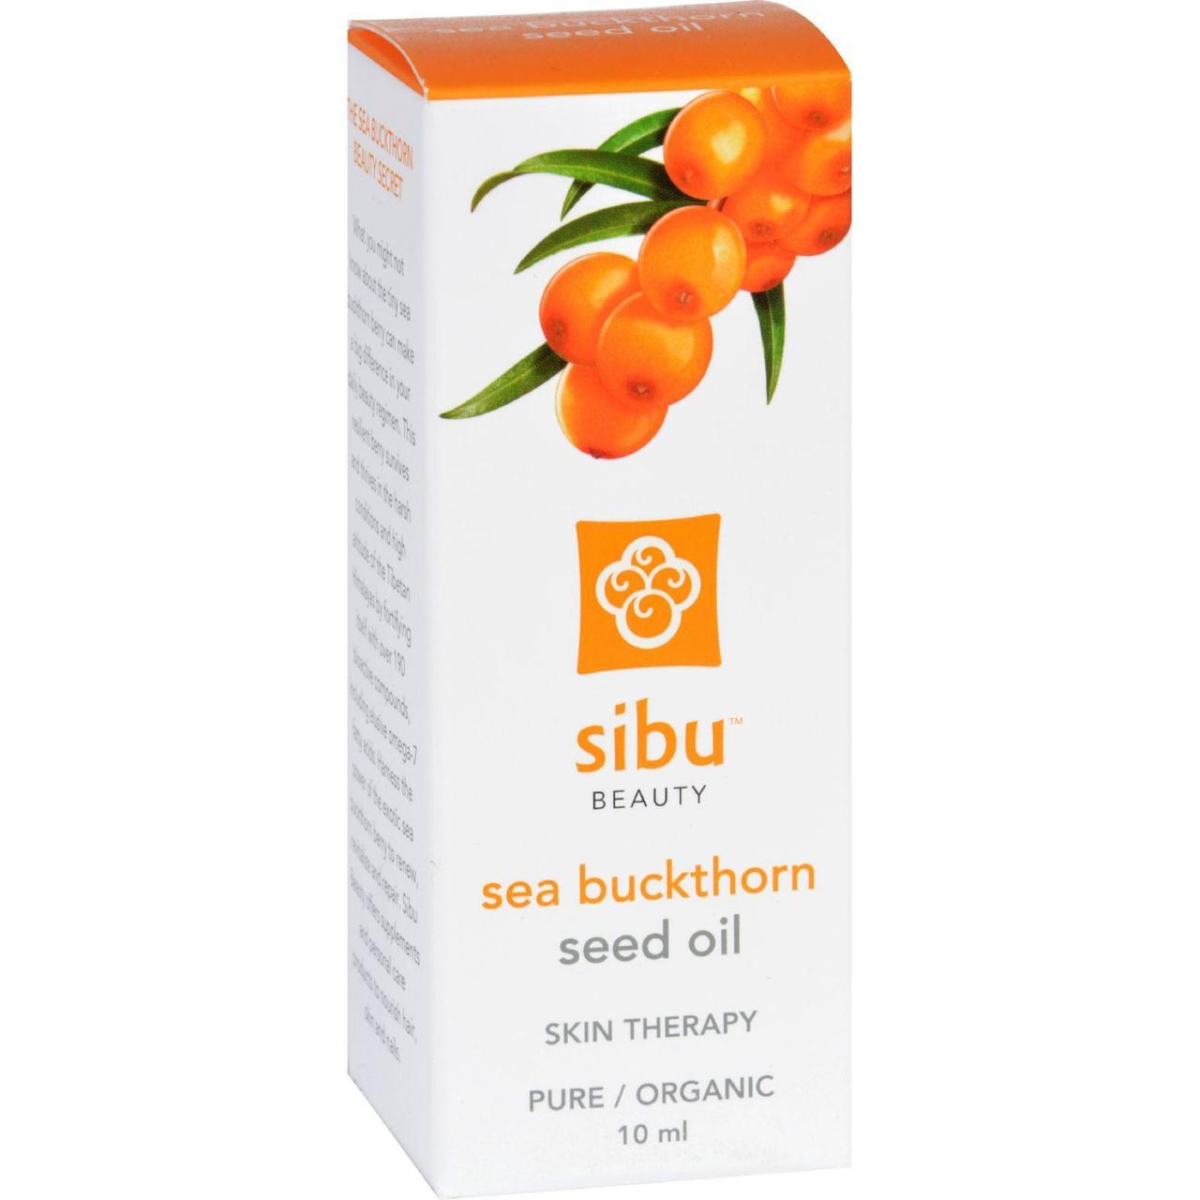 Hg1199512 10 Ml Beauty Sea Buckthorn Seed Oil For All Skin Types